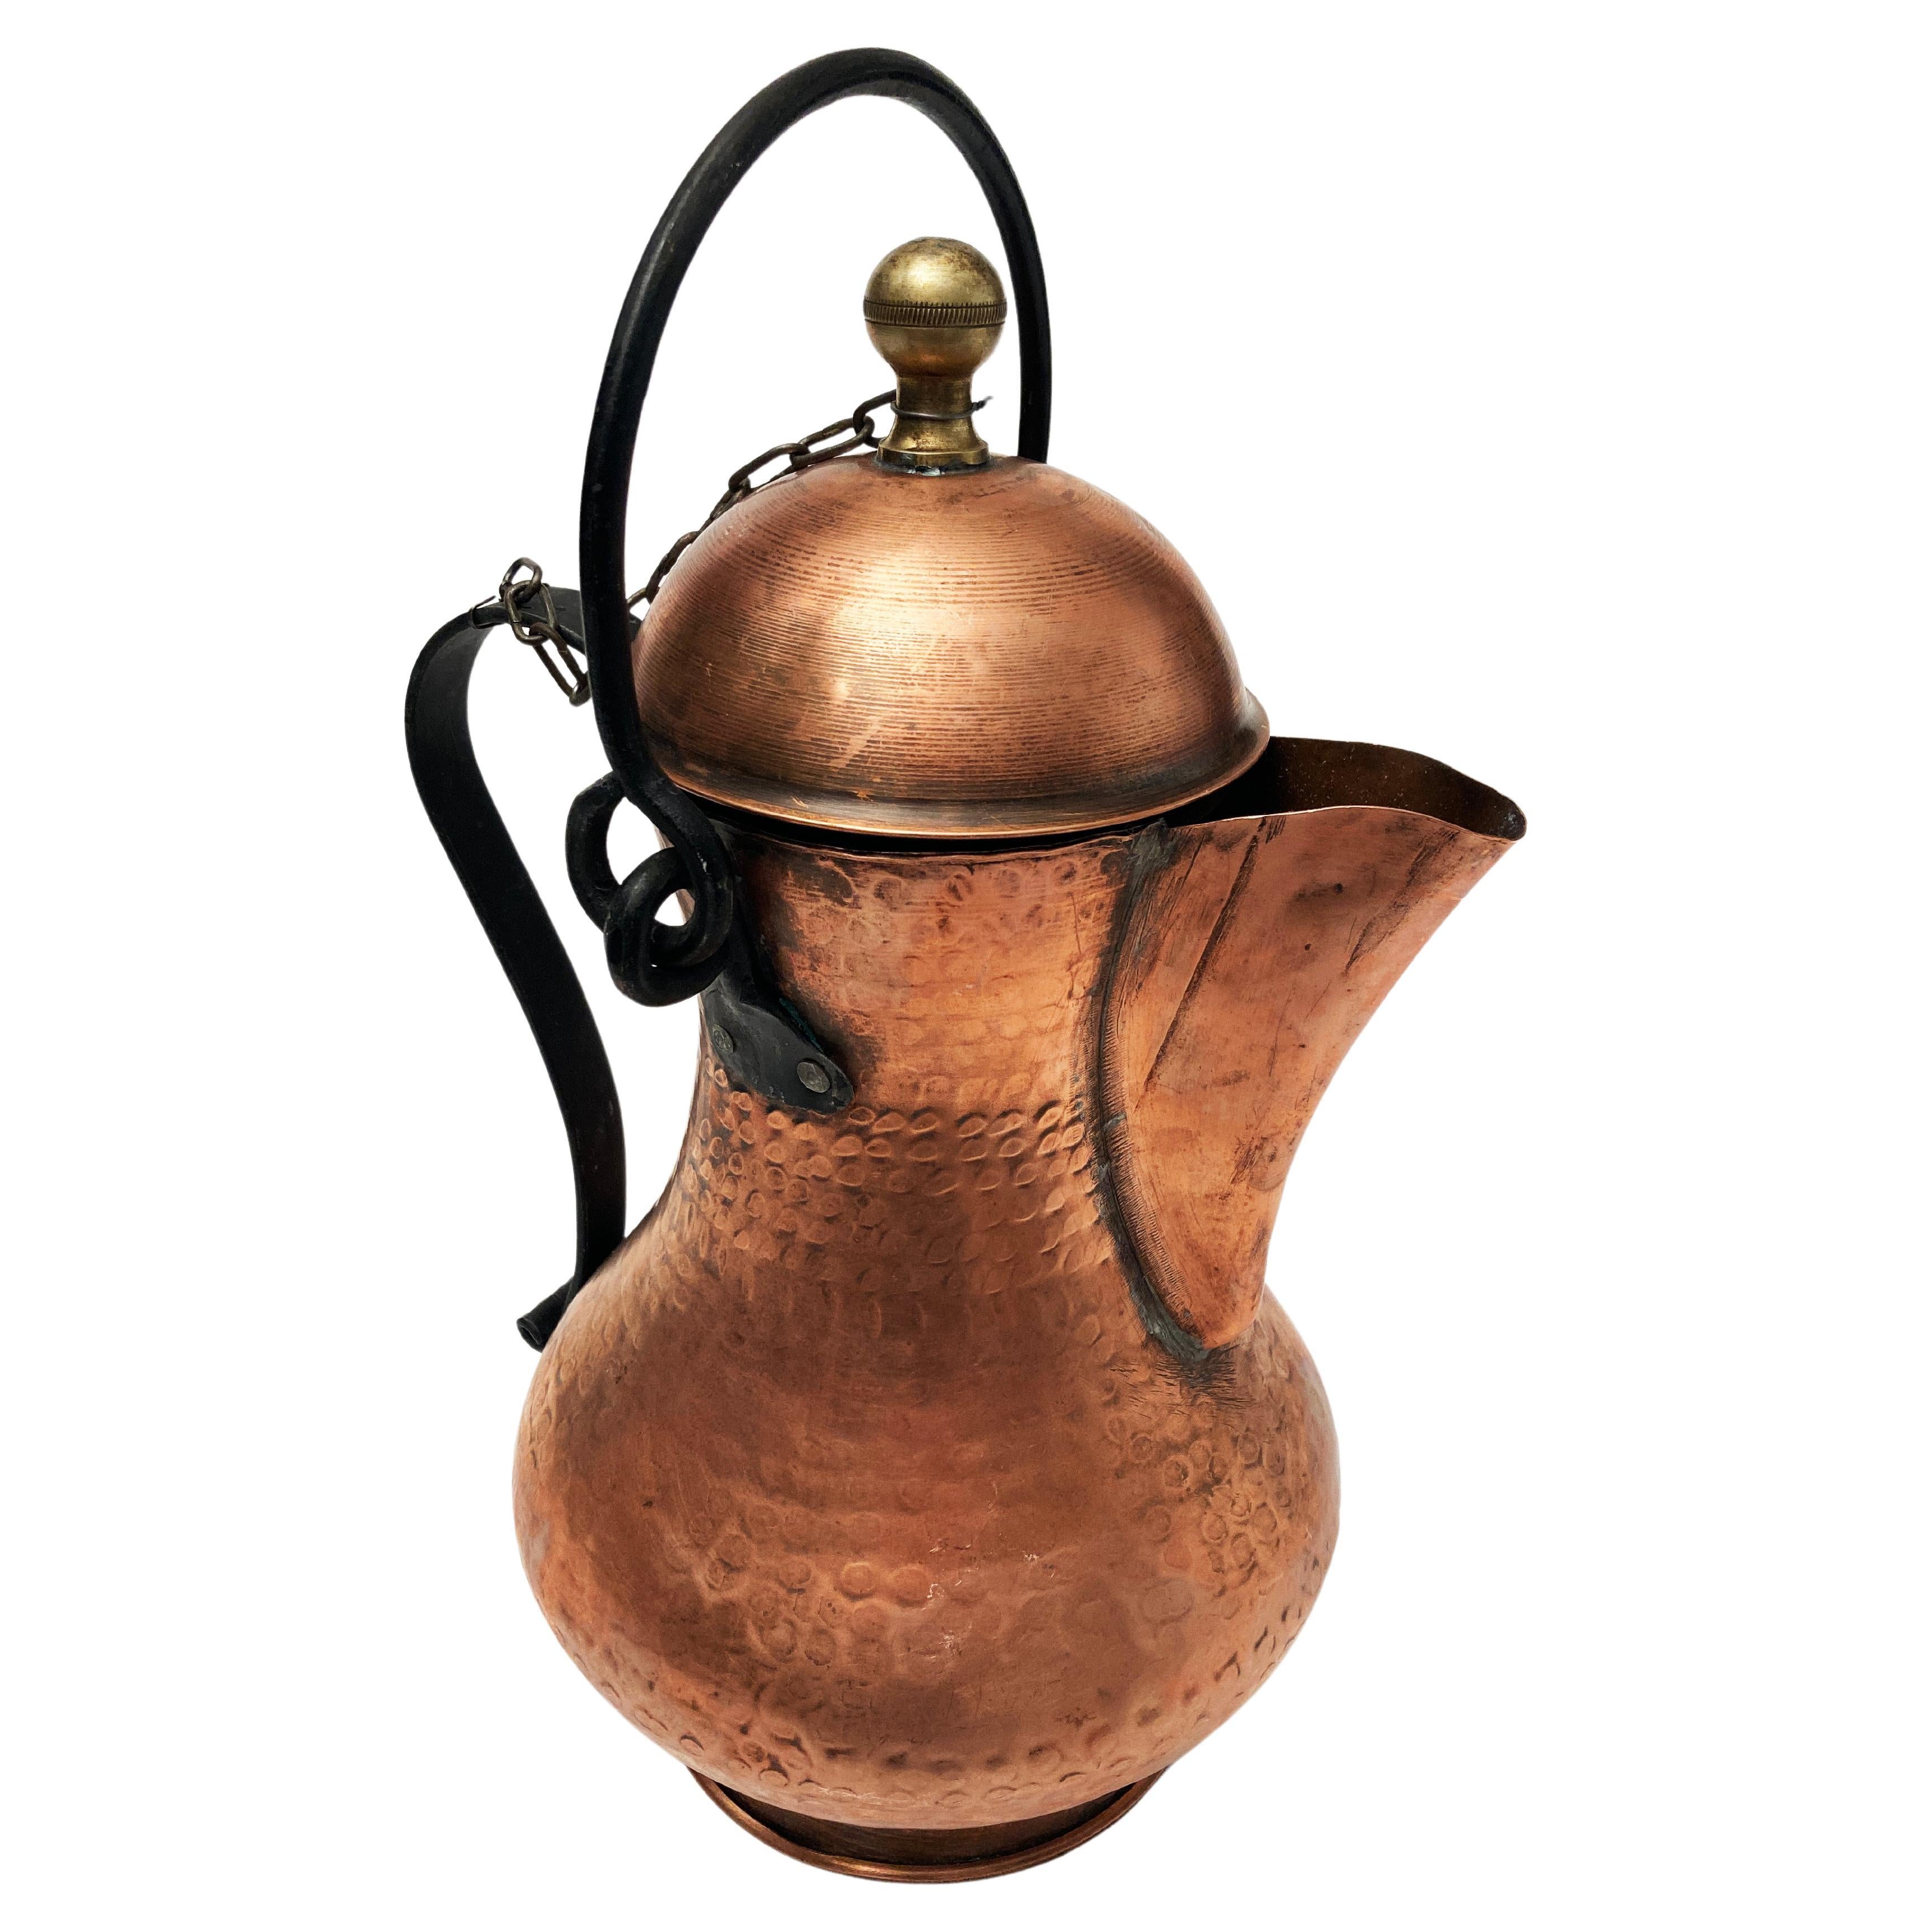 Spanish Hand-hammered Copper Water Pot with 2 Wrought Iron Handles